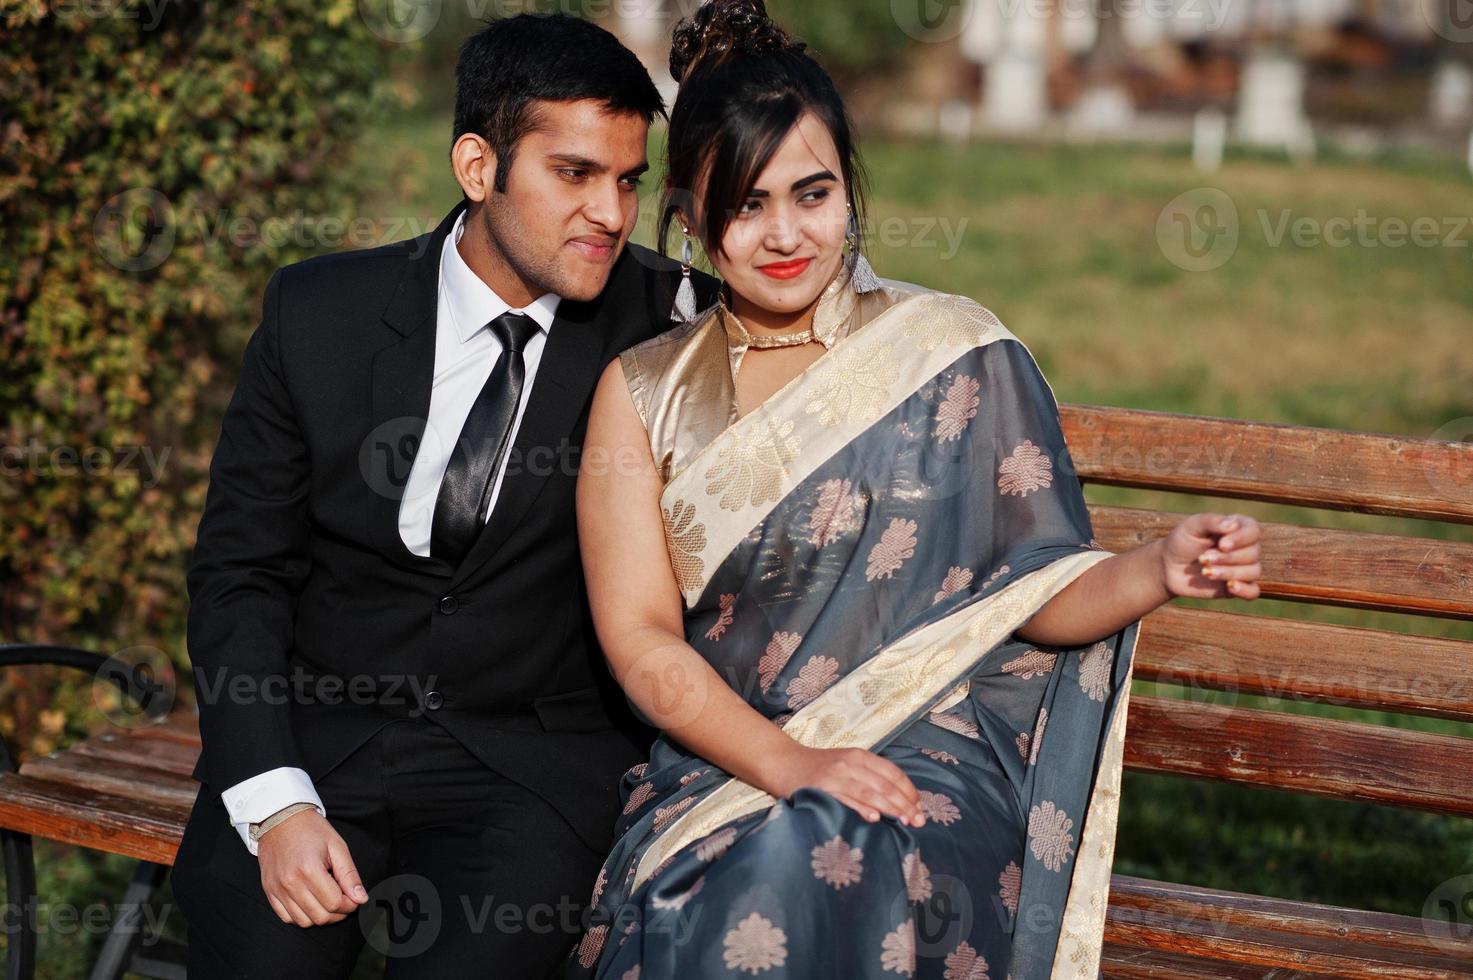 Elegant and fashionable indian friends couple of woman in saree and man in suit sitting on bench. photo